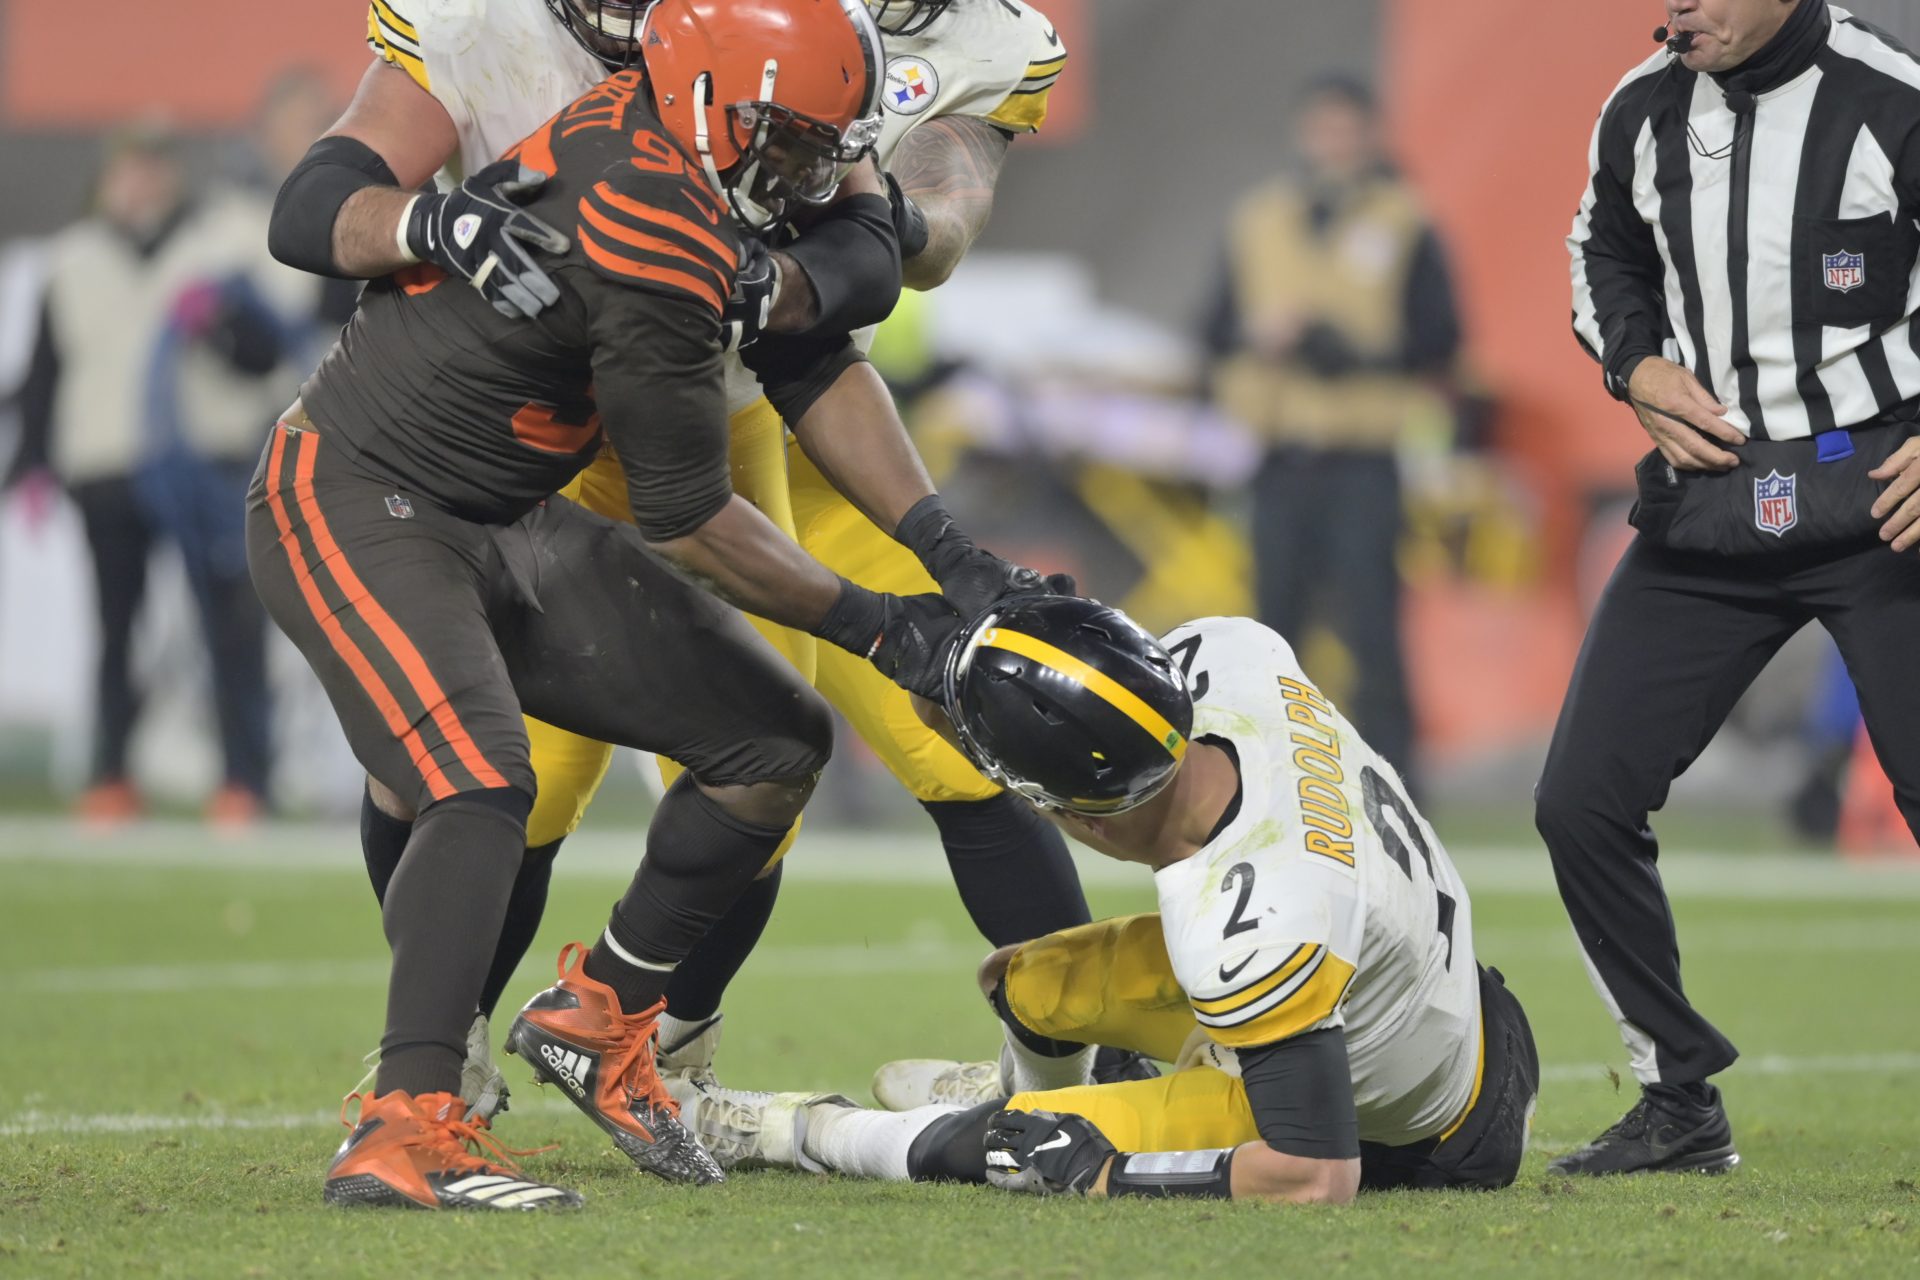 Cleveland Browns defensive end Myles Garrett (95) pulls the helmet off Pittsburgh Steelers quarterback Mason Rudolph (2) in the fourth quarter of an NFL football game, Thursday, Nov. 14, 2019, in Cleveland. The Browns won 21-7.